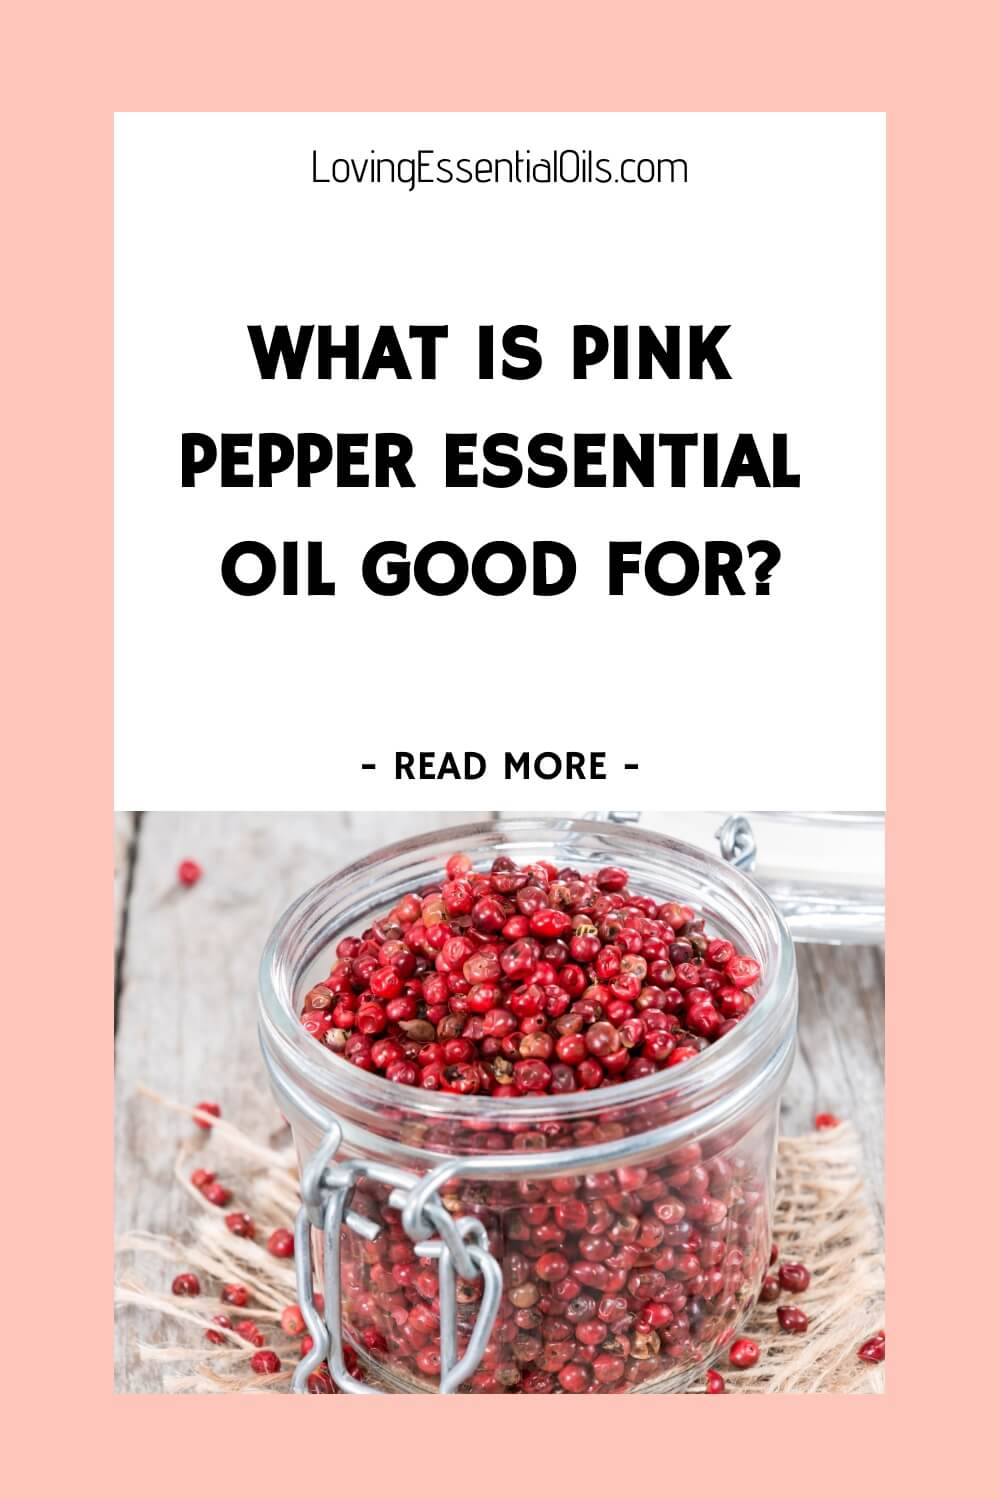 What is Pink Pepper Essential Oil Good for?